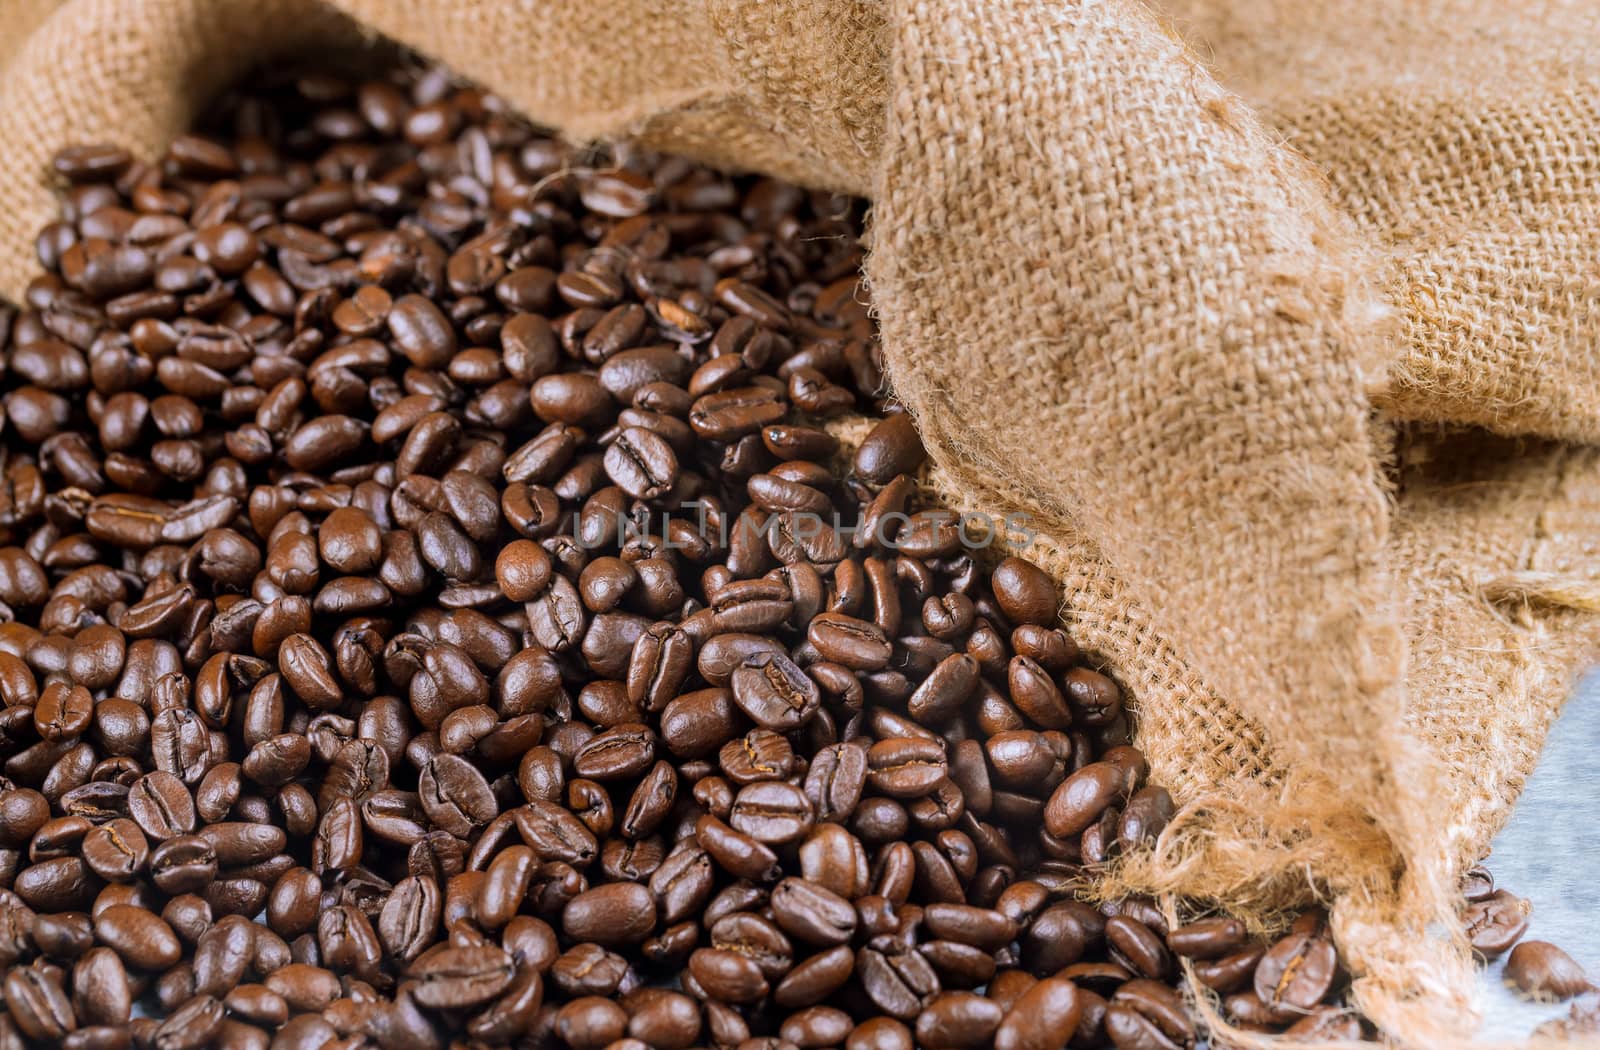 Black coffee beans in a bagging. Close up.